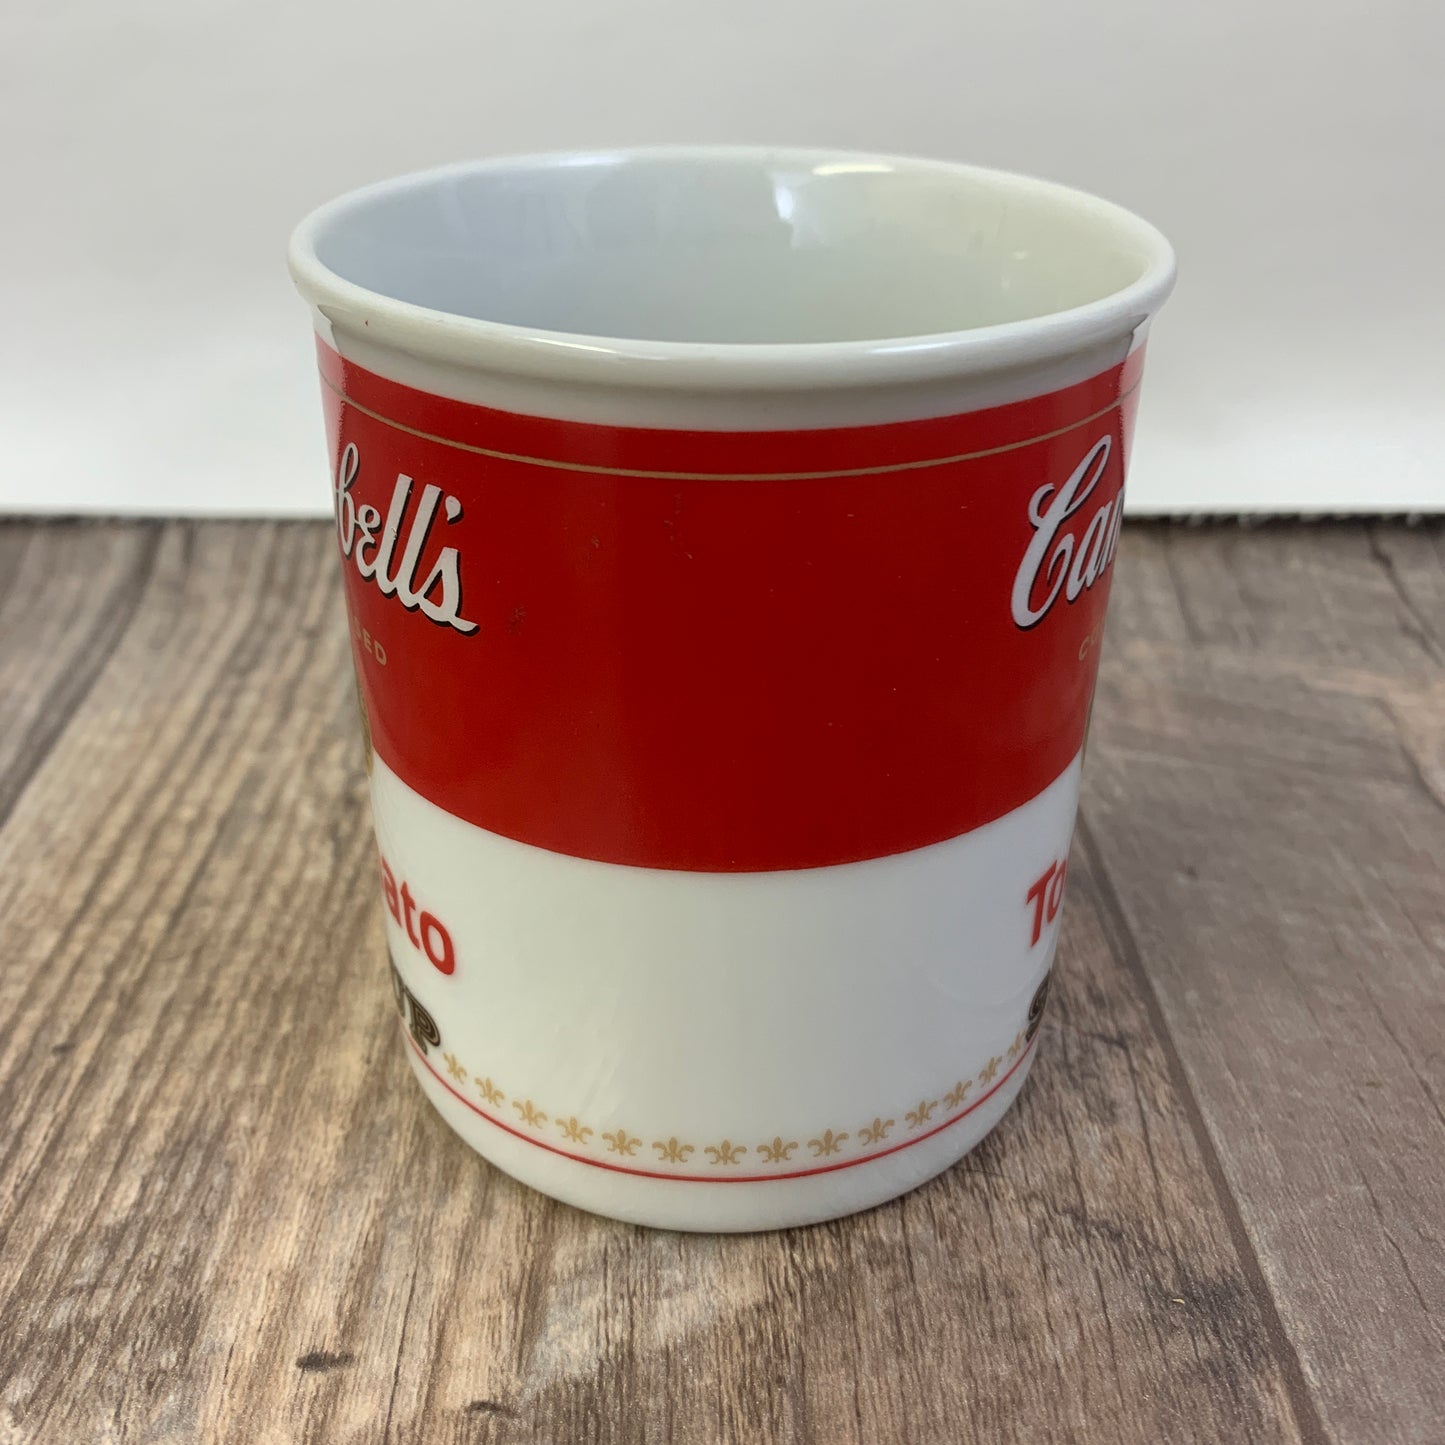 Pair of Campbells Soup Mugs, 125th Anniversary of Campbell’s Soup Commemorative Mug